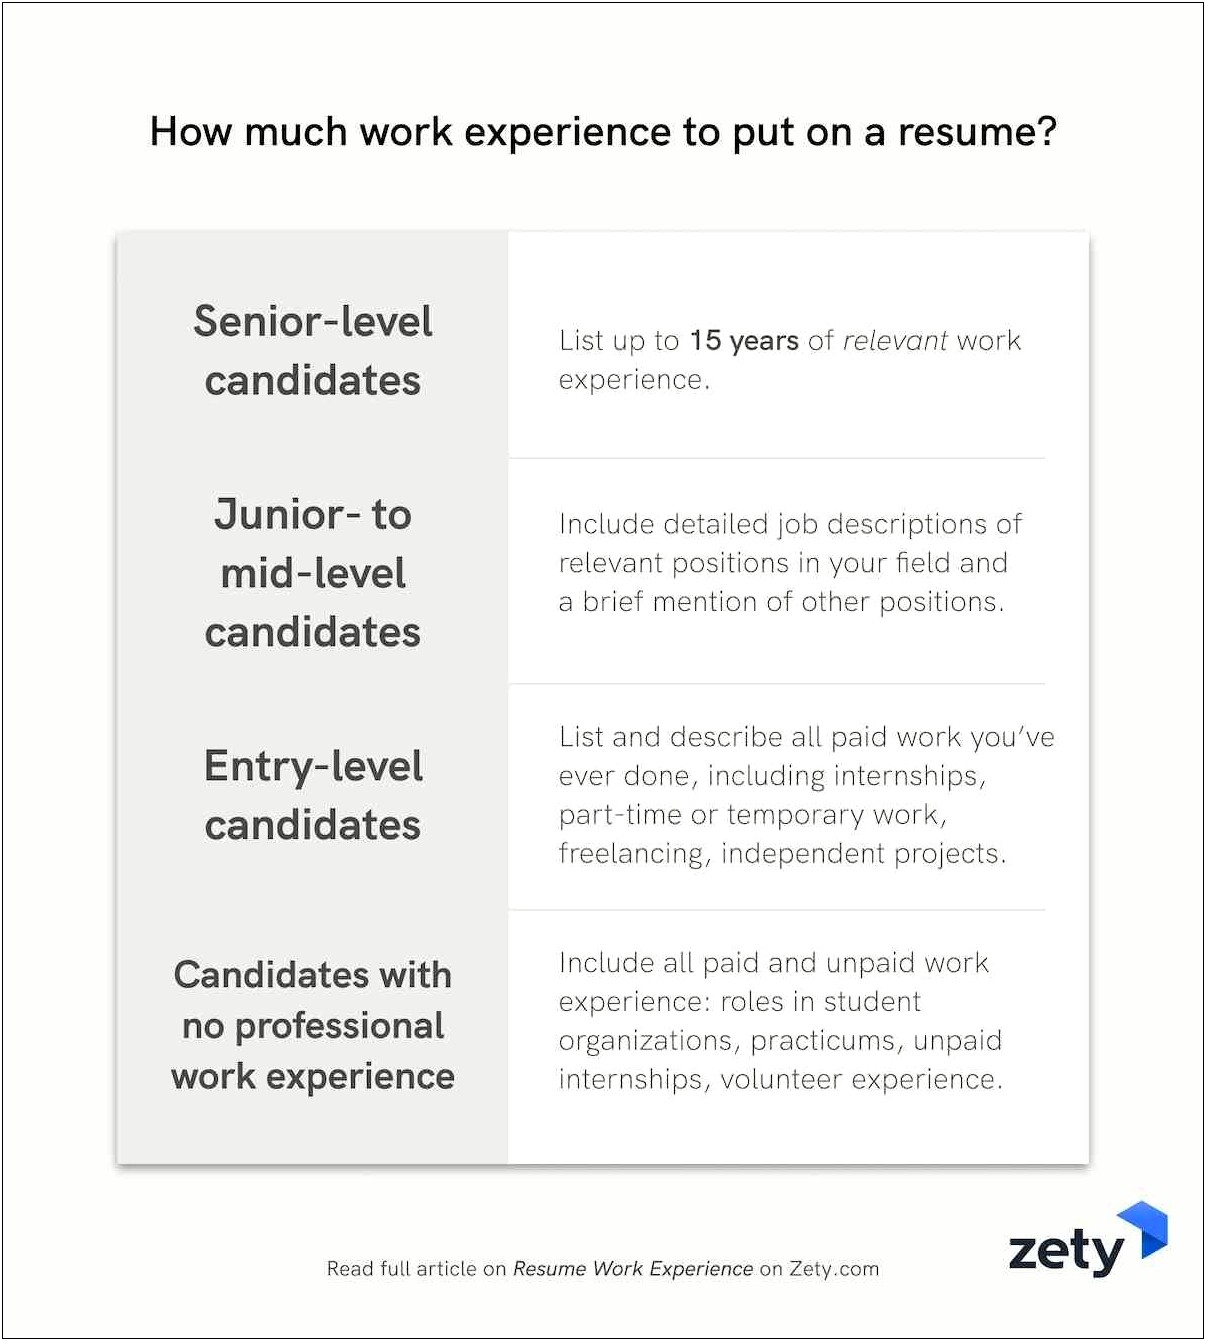 Does Changing Your Job Often Affect Your Resume